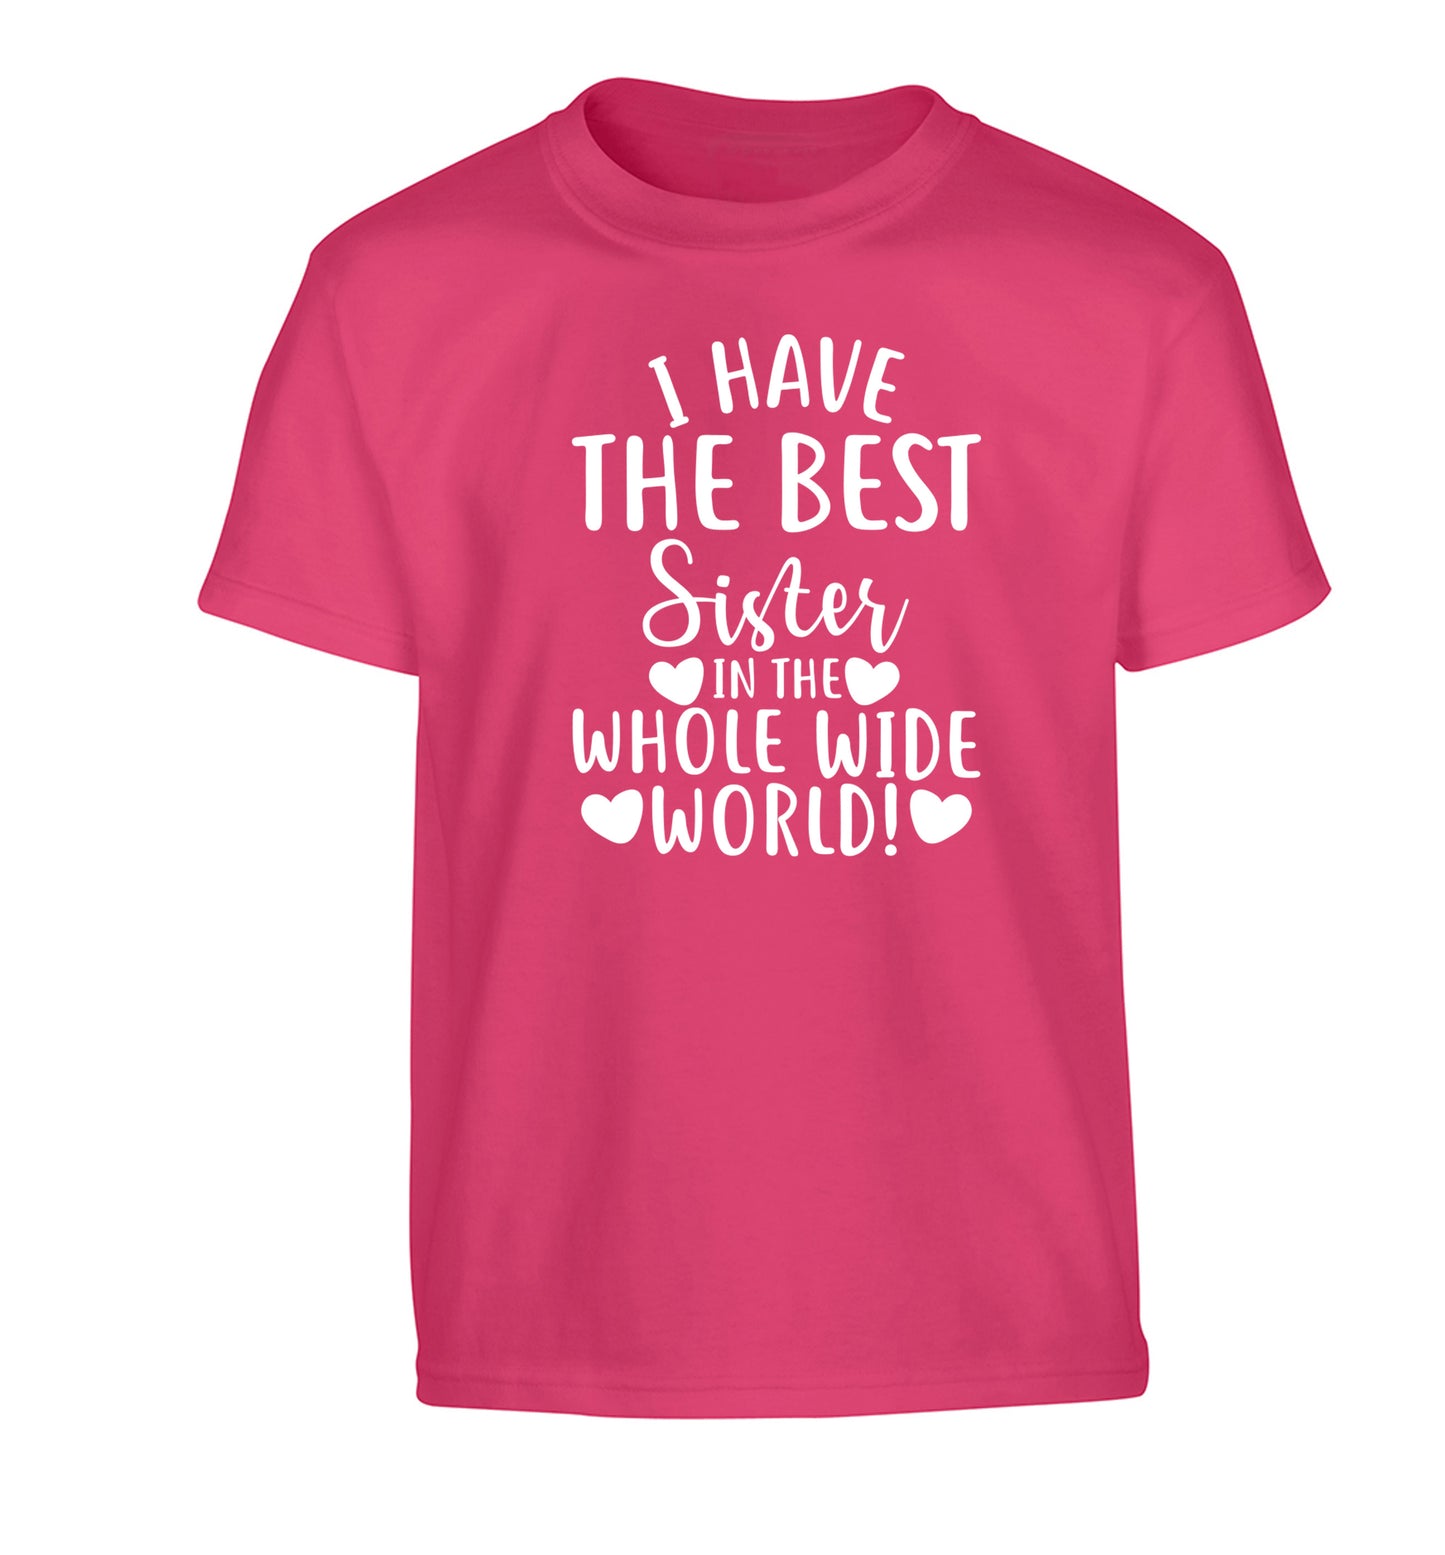 I have the best sister in the whole wide world! Children's pink Tshirt 12-13 Years